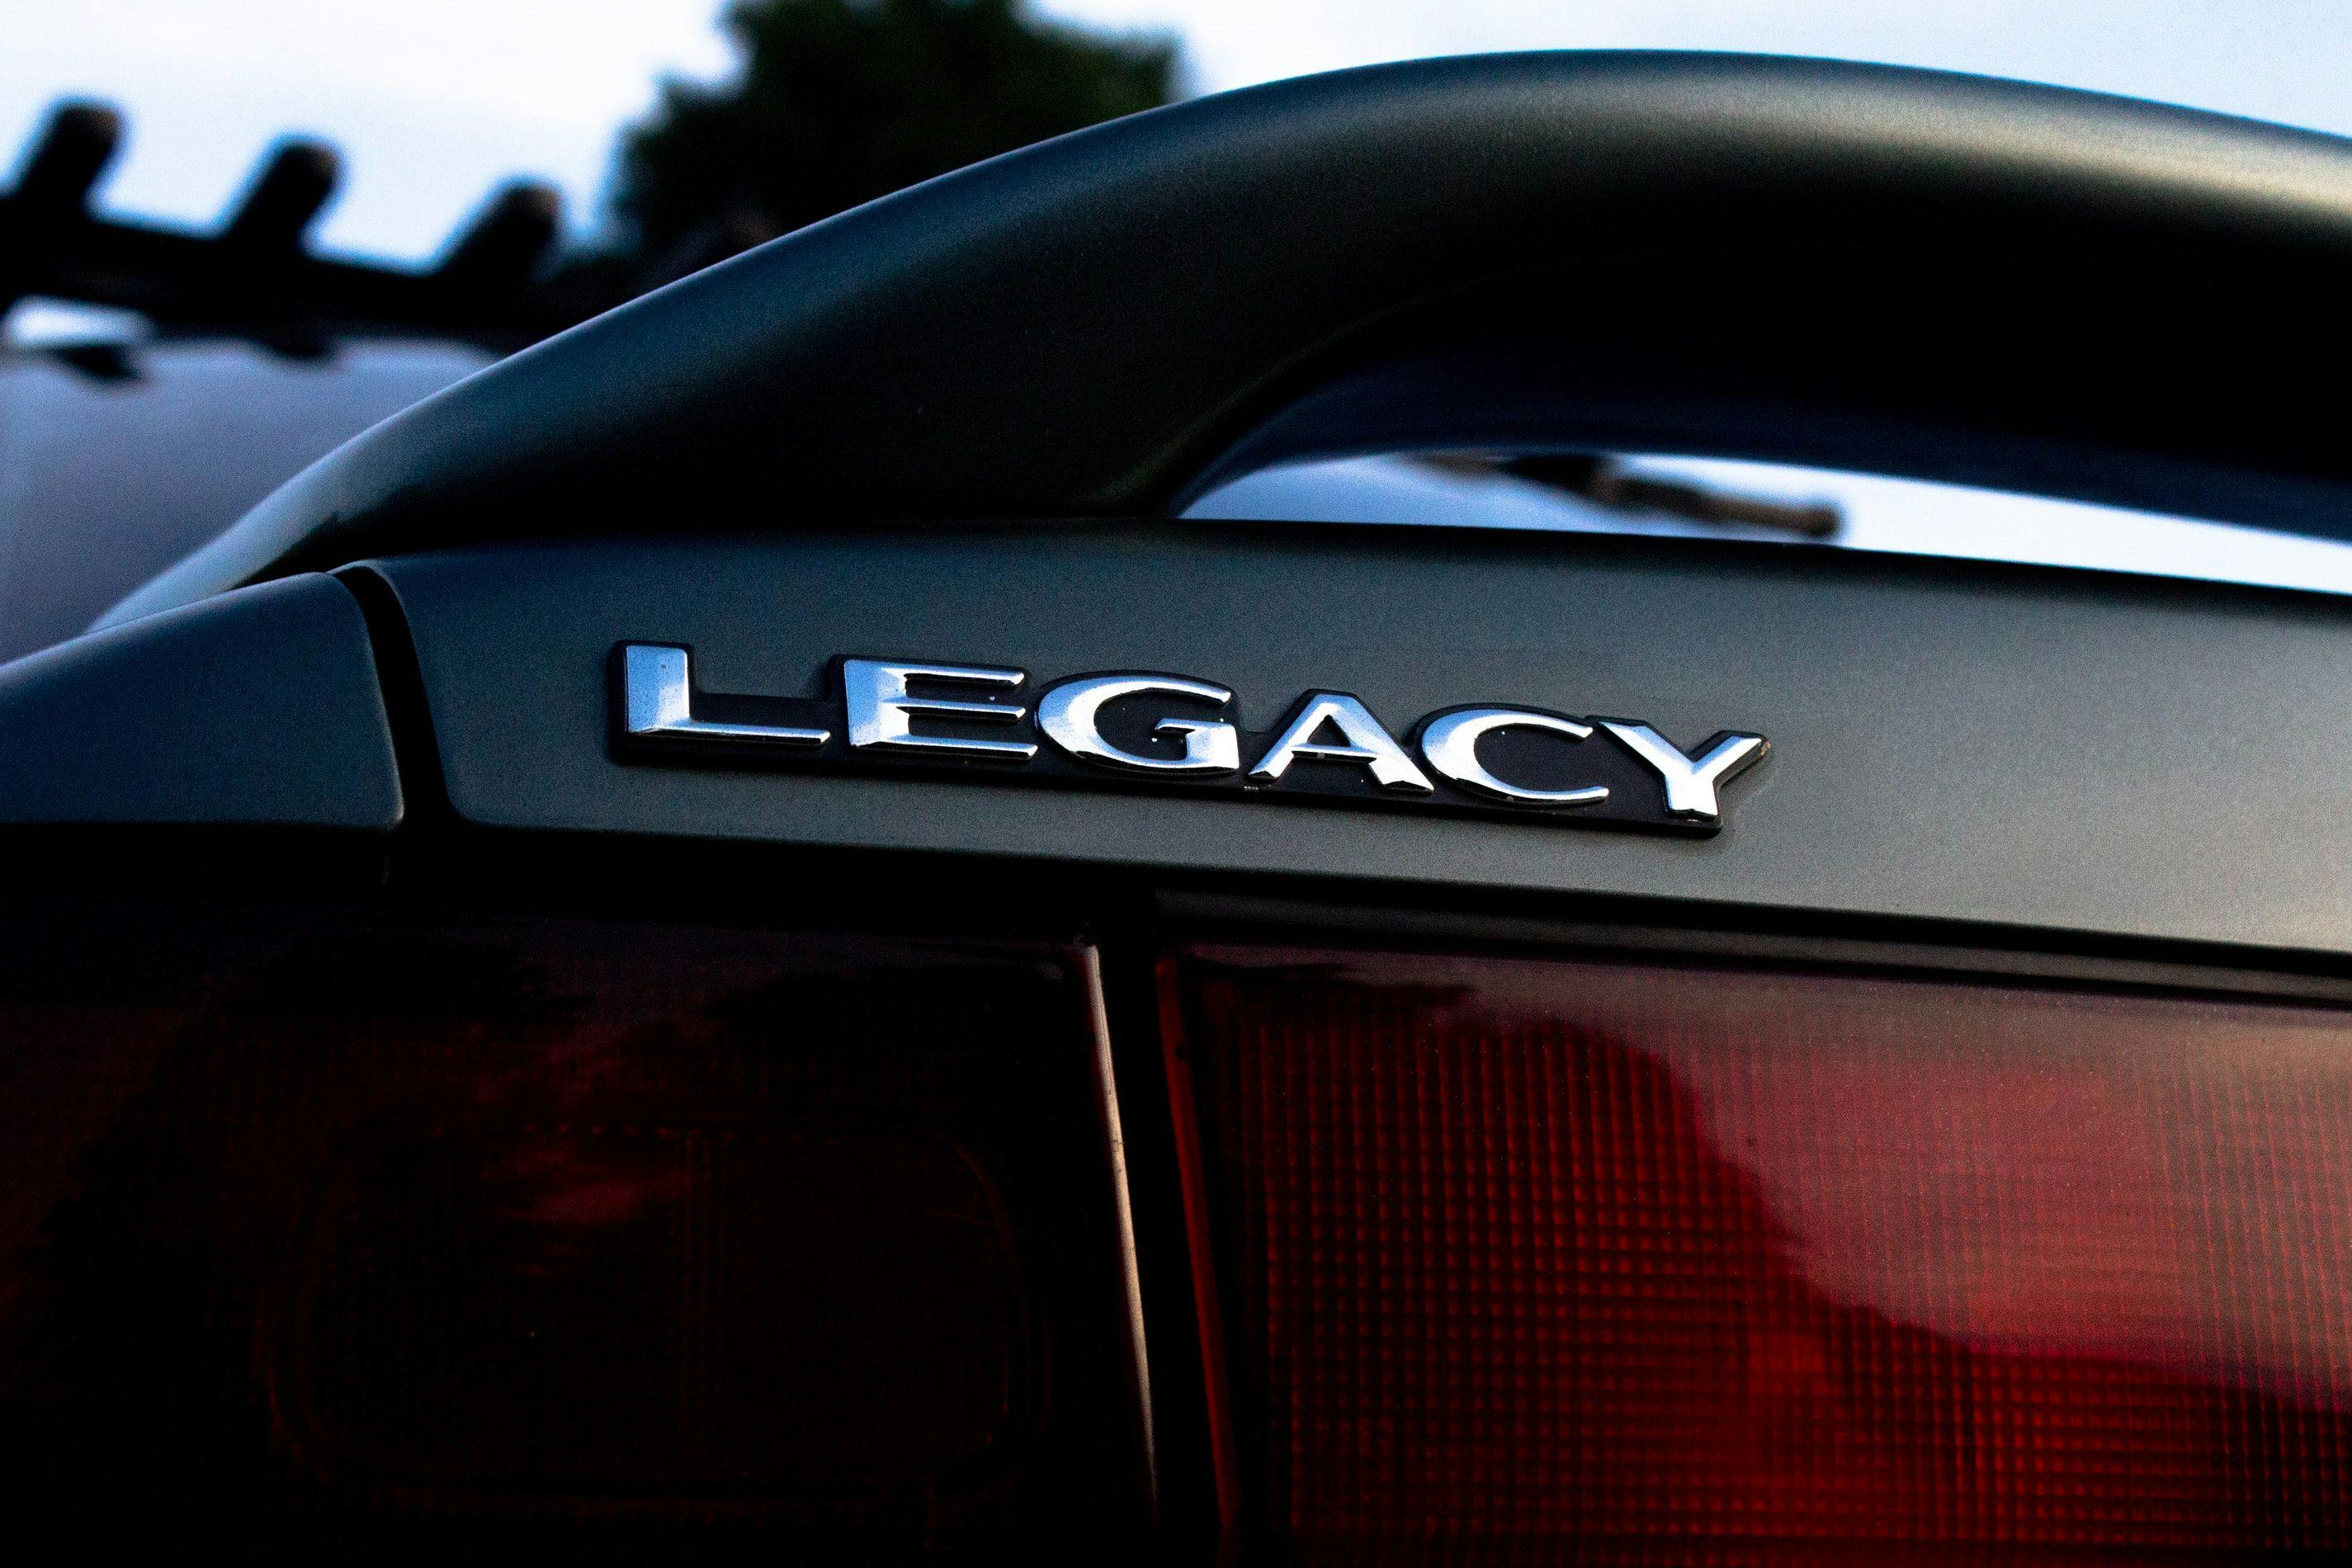 featured image - What is Legacy Software? - An Introductory Guide